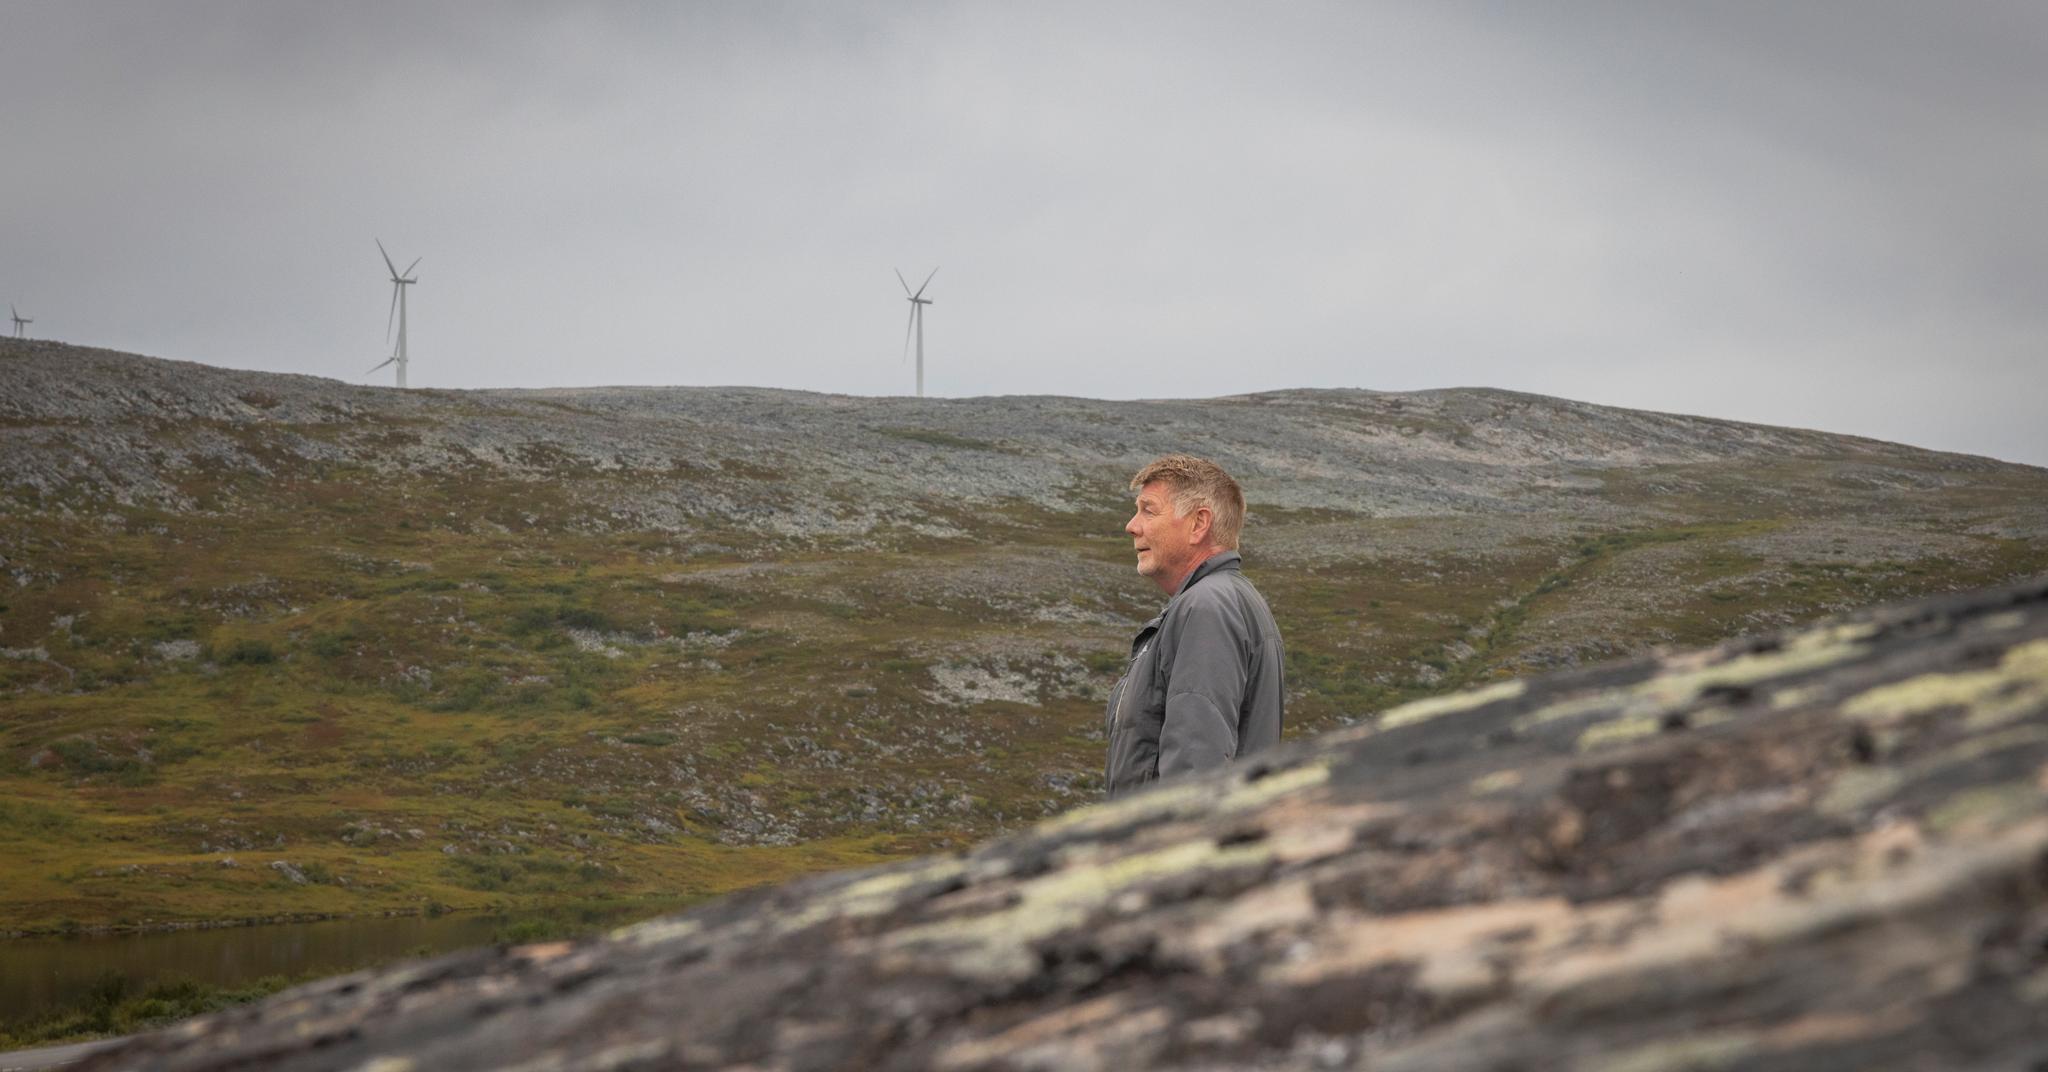 He could overrule the government’s wind power investment in Finland